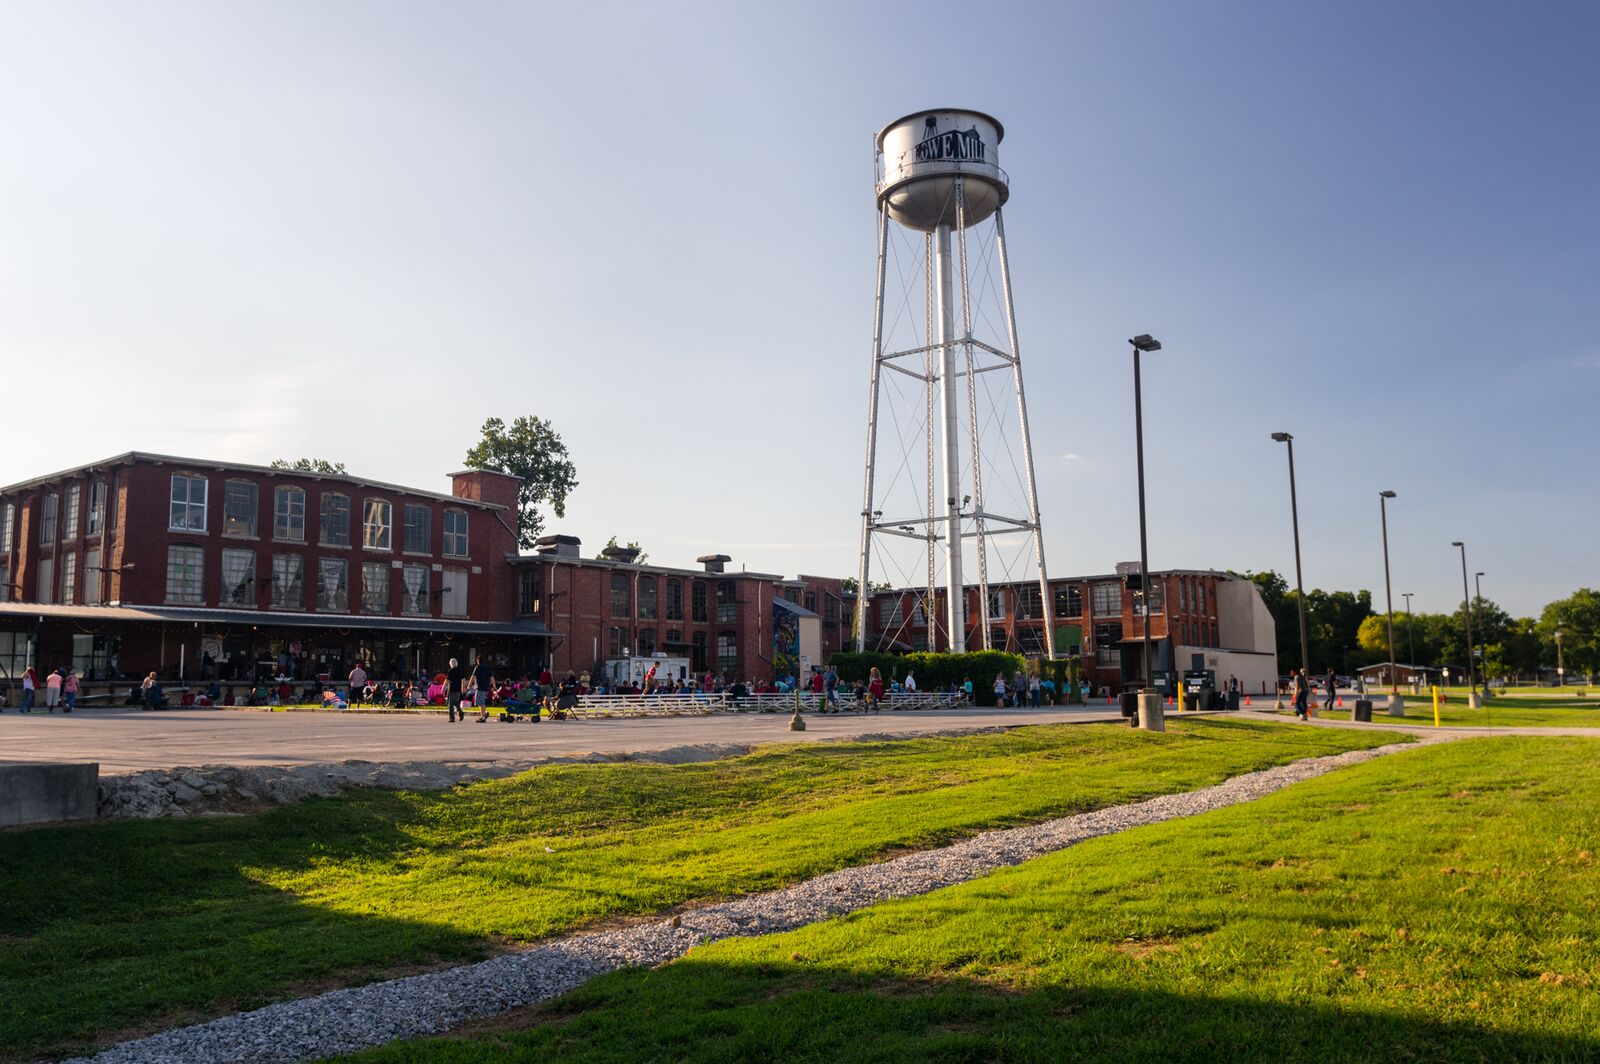 Water tower and school building with clear sky background